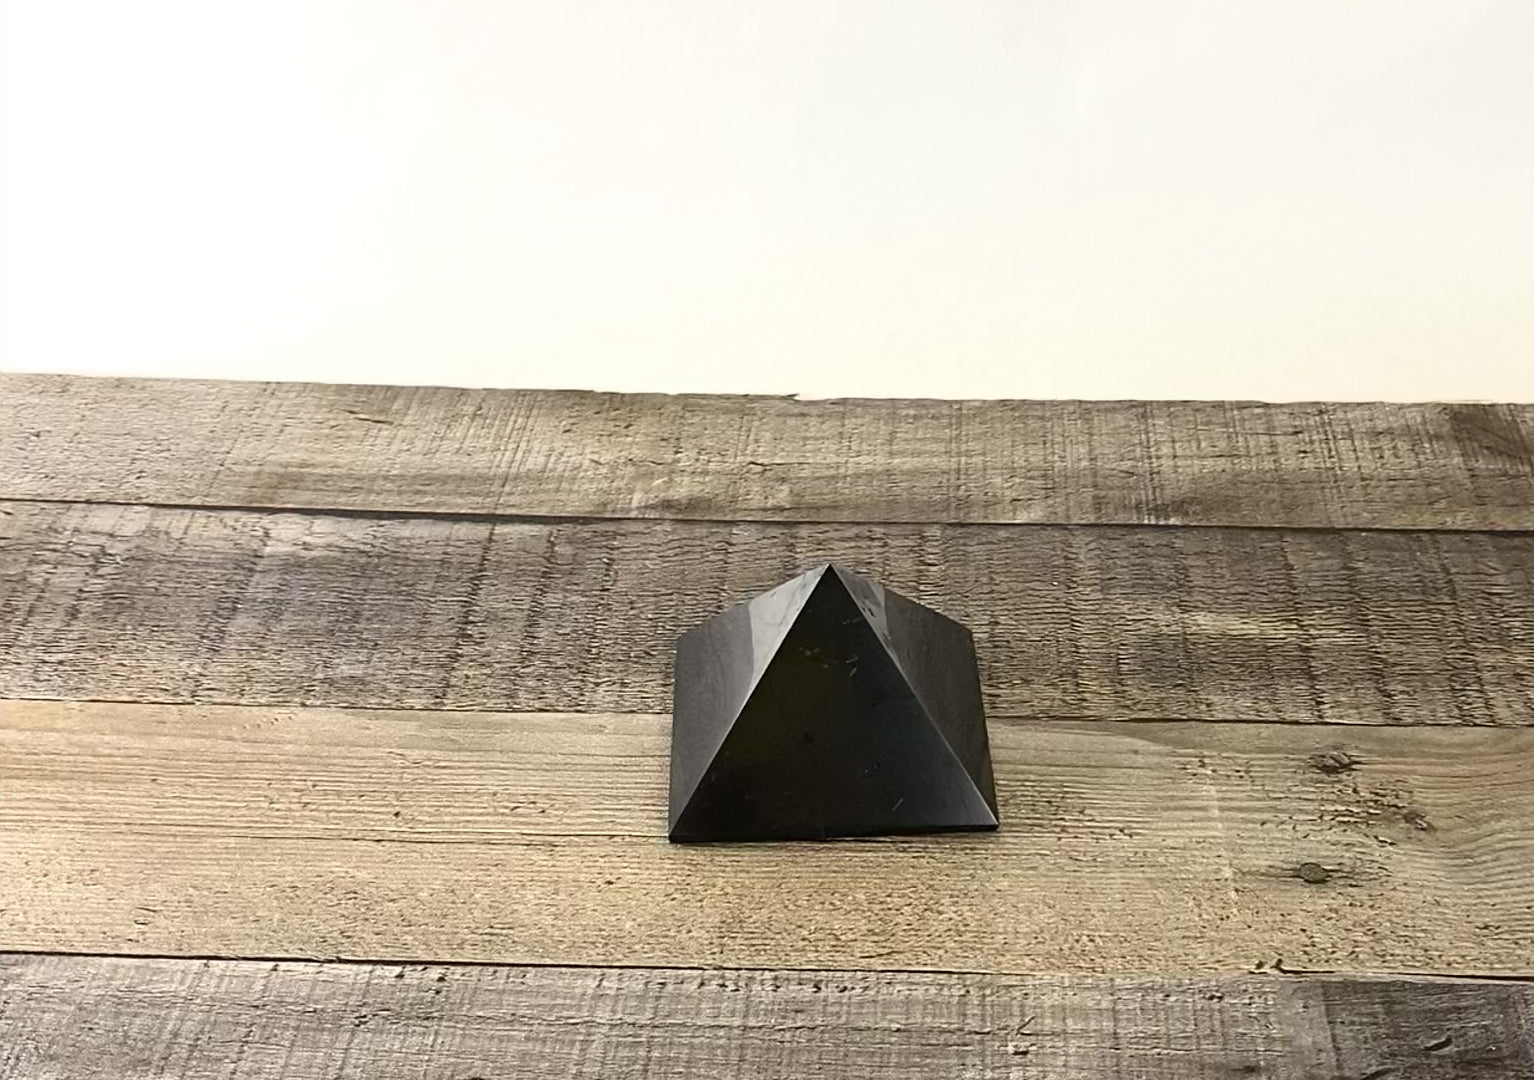 Deep black Shungite pyramid that is about 3" square at the base - Video